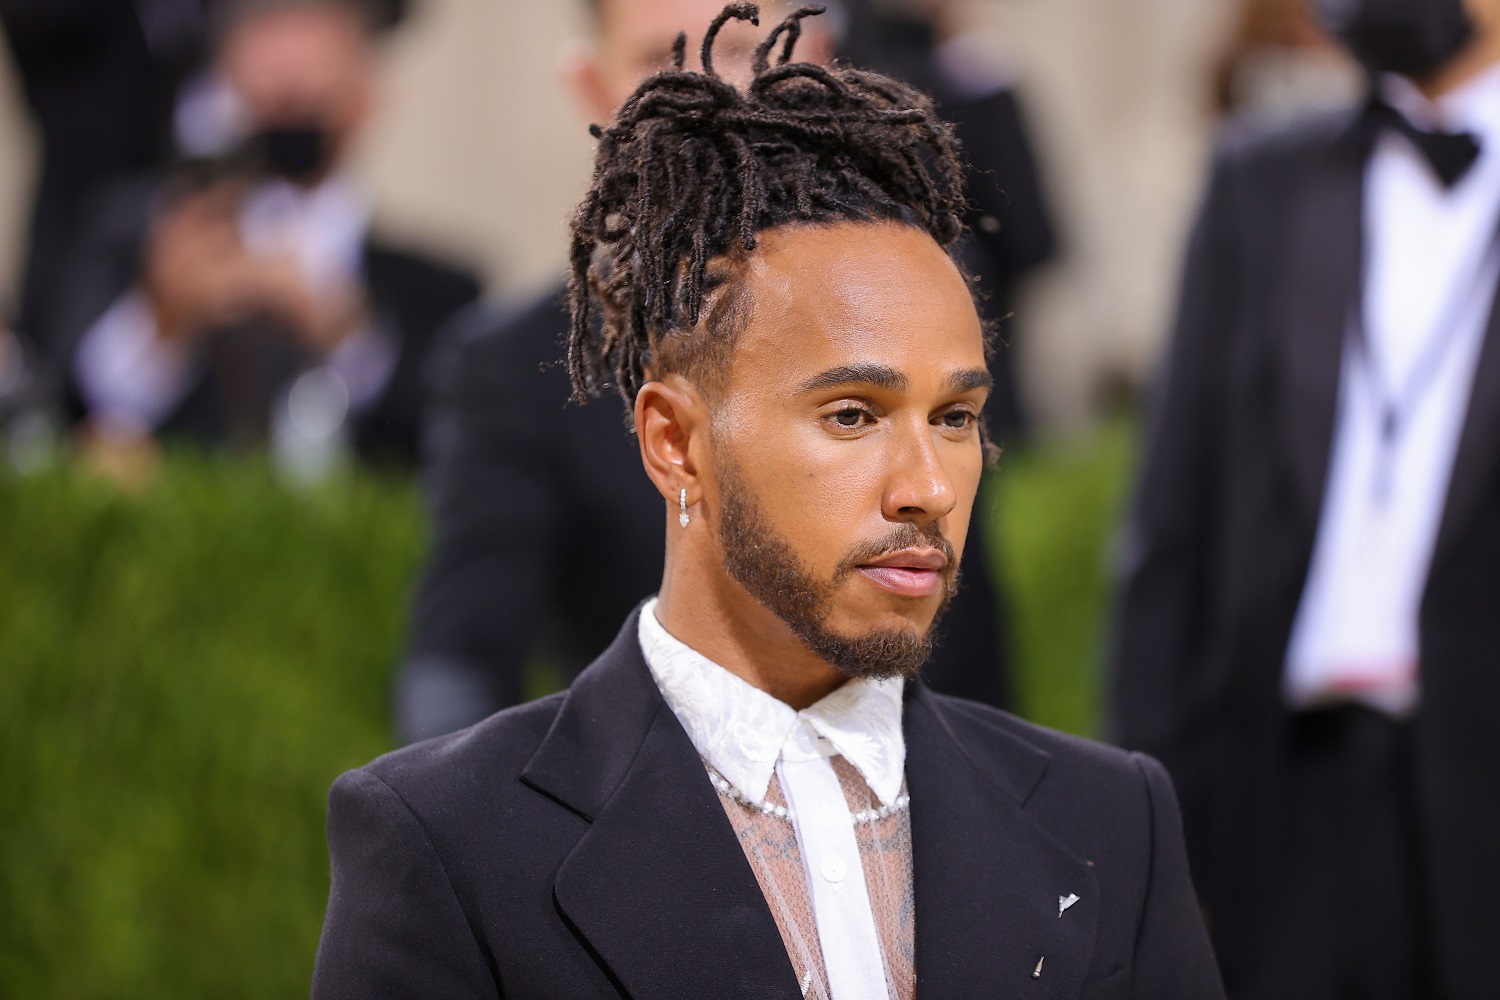 Lewis Hamilton attends The 2021 Met Gala Celebrating In America: A Lexicon Of Fashion at Metropolitan Museum of Art on Sept. 13, 2021, in New York City.